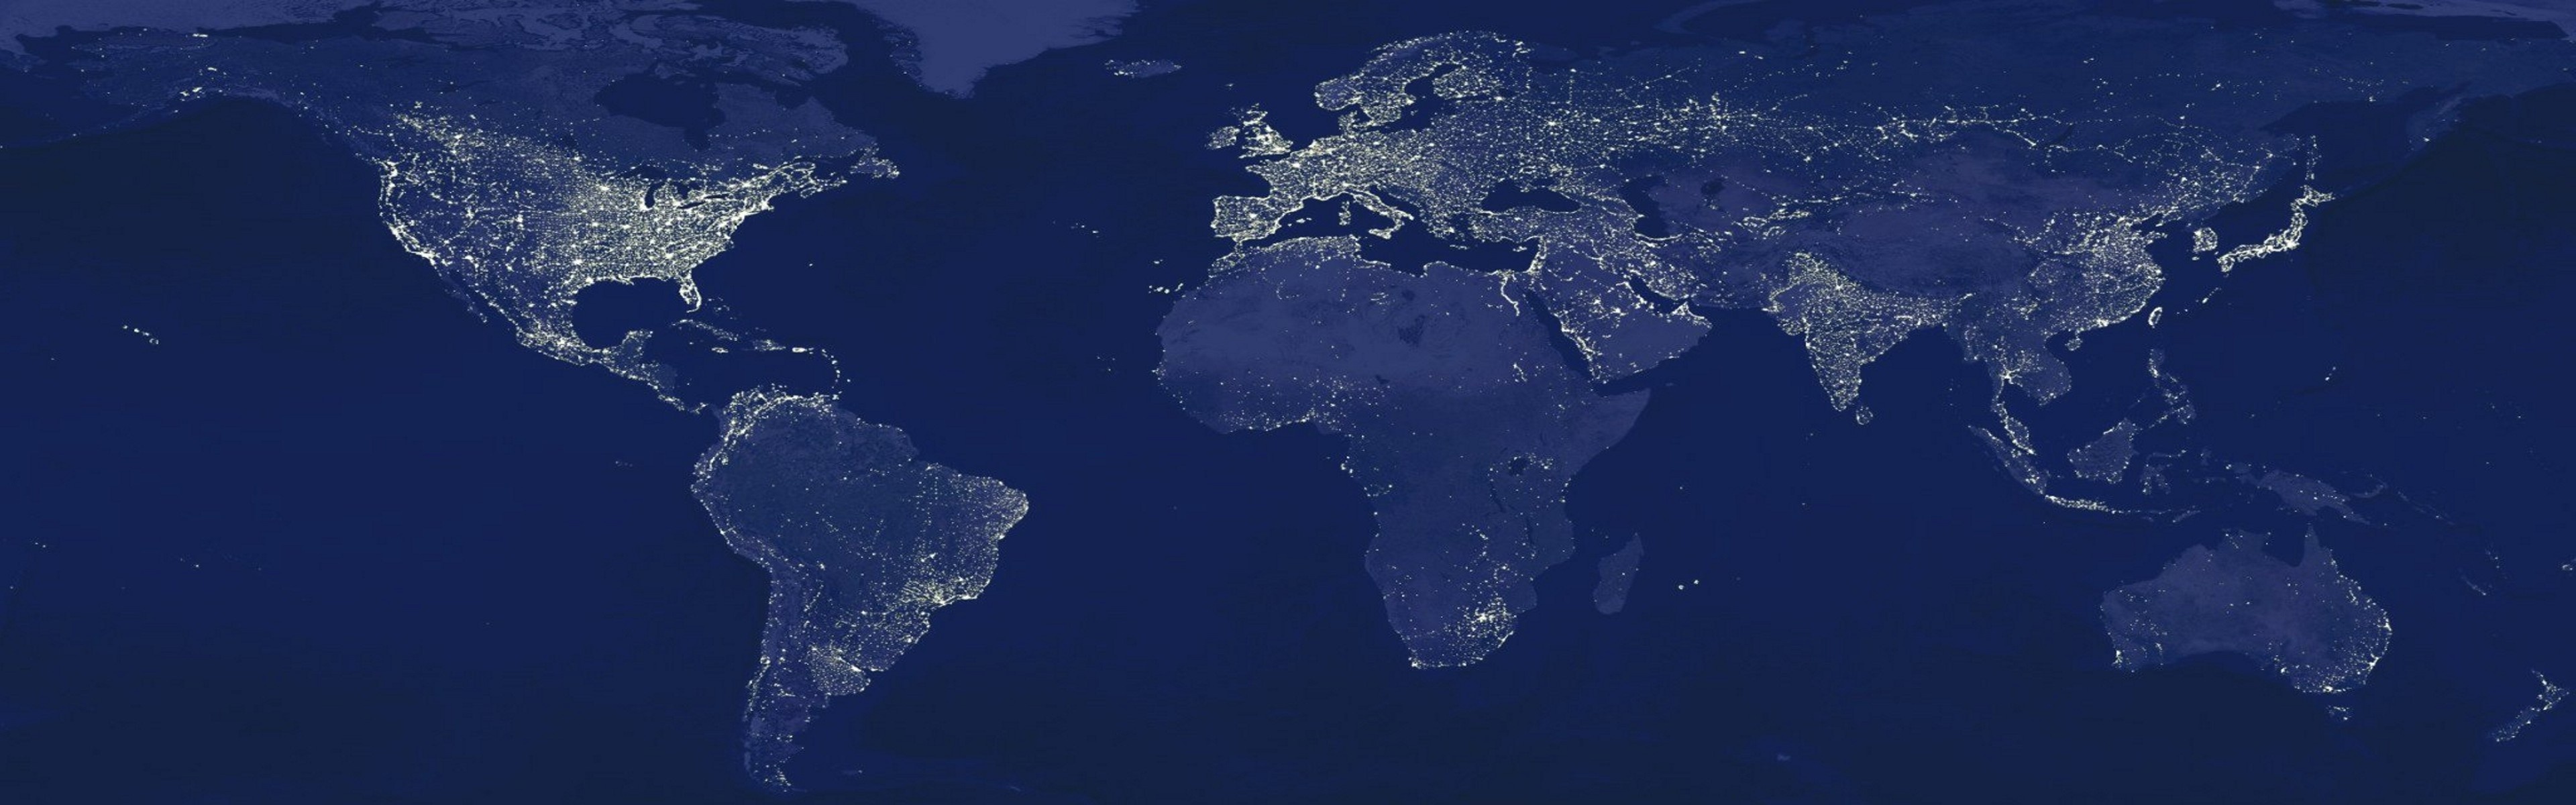 Night earth pollution, Global maps, Old world map, Vintage aesthetic, 3840x1200 Dual Screen Desktop